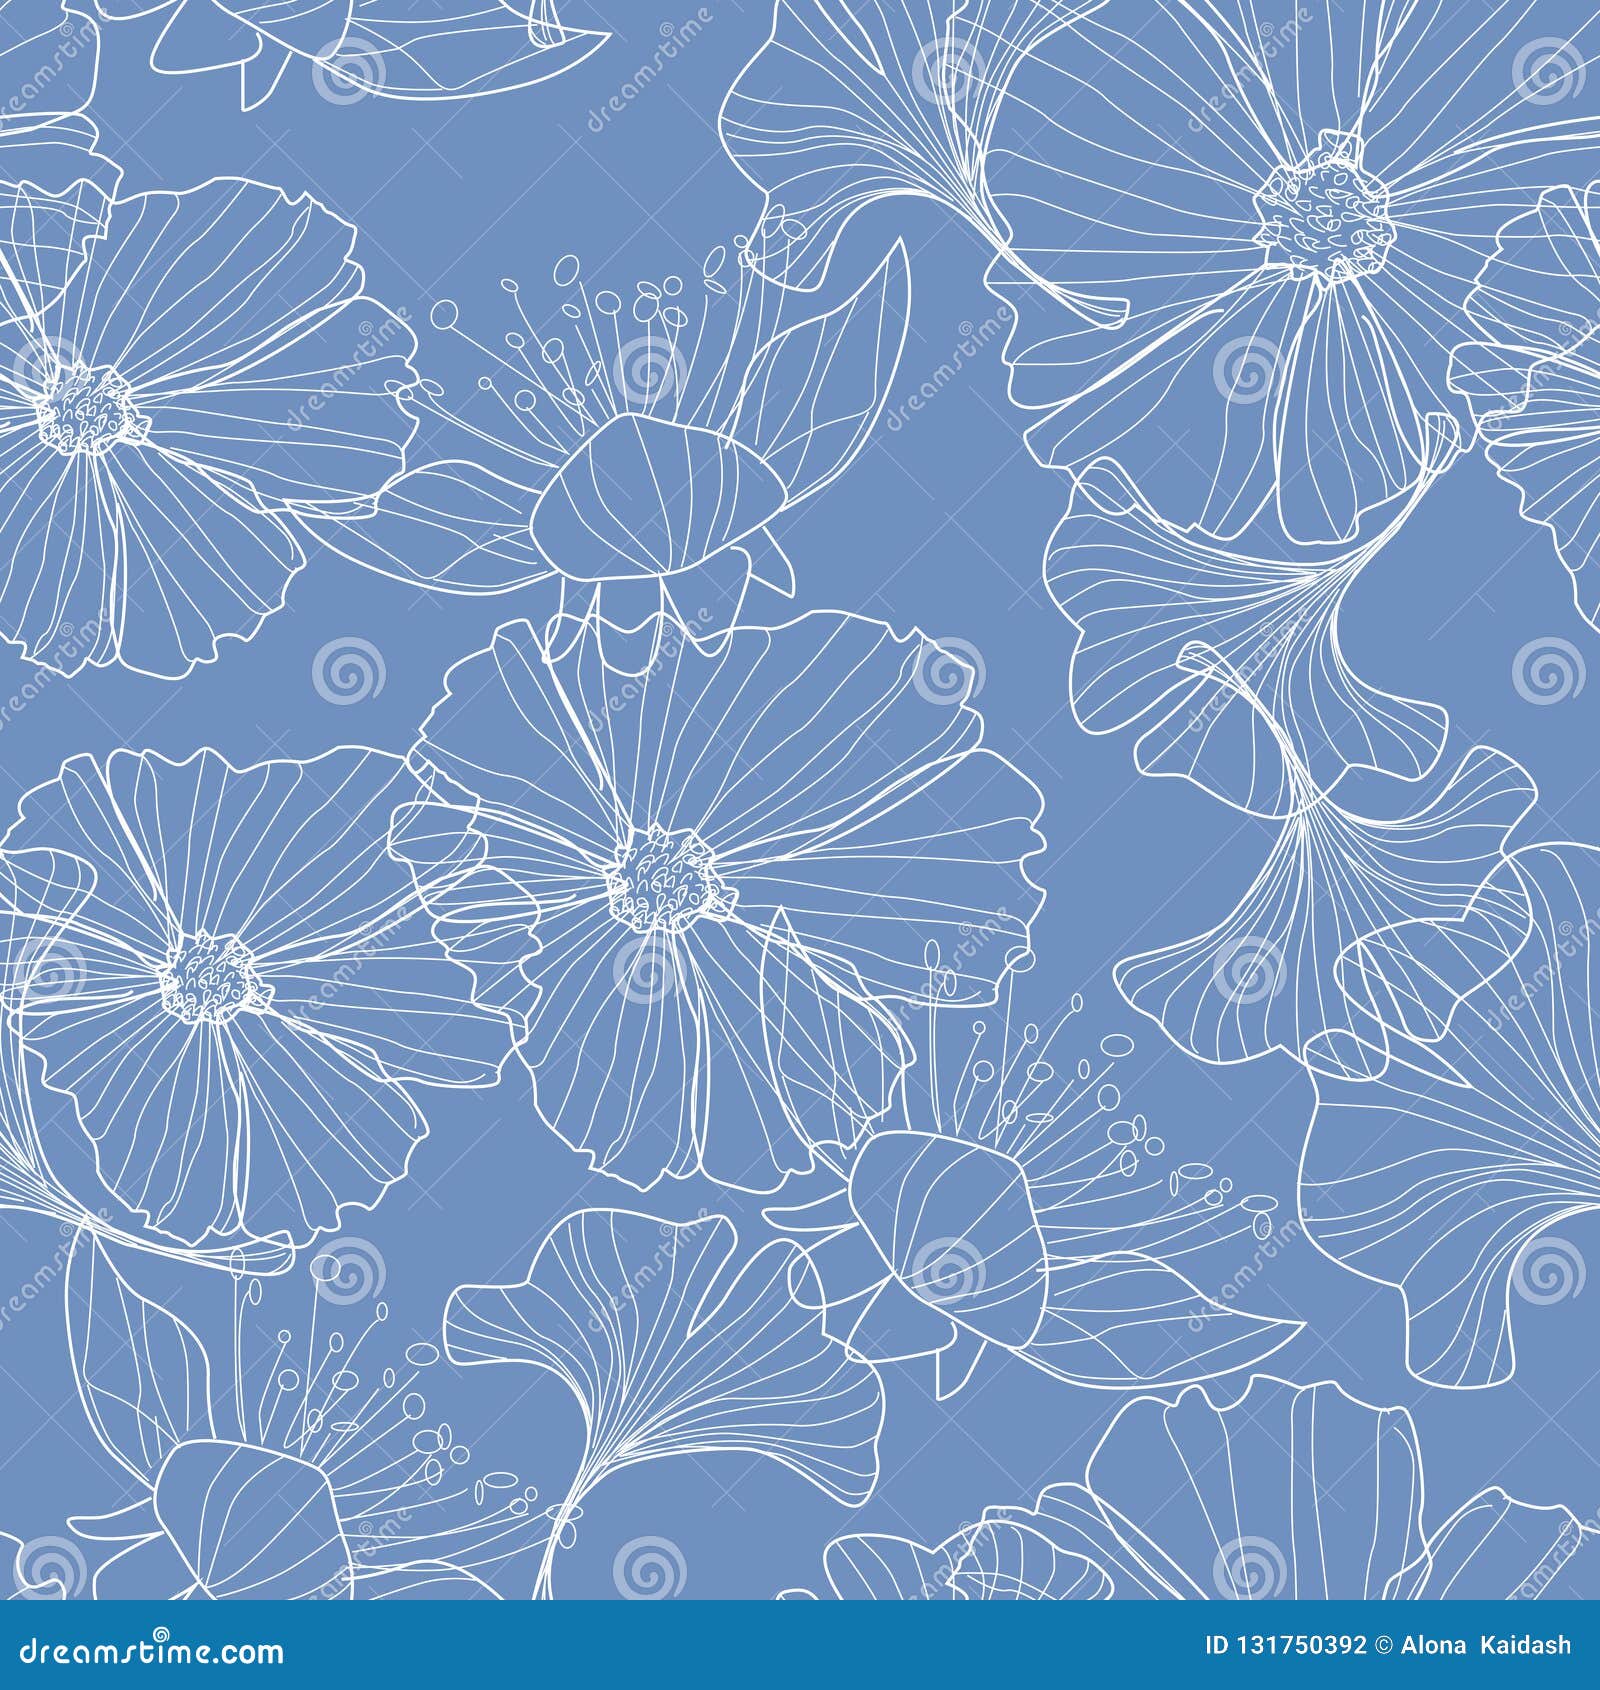 linear floral background, flowers pattern.